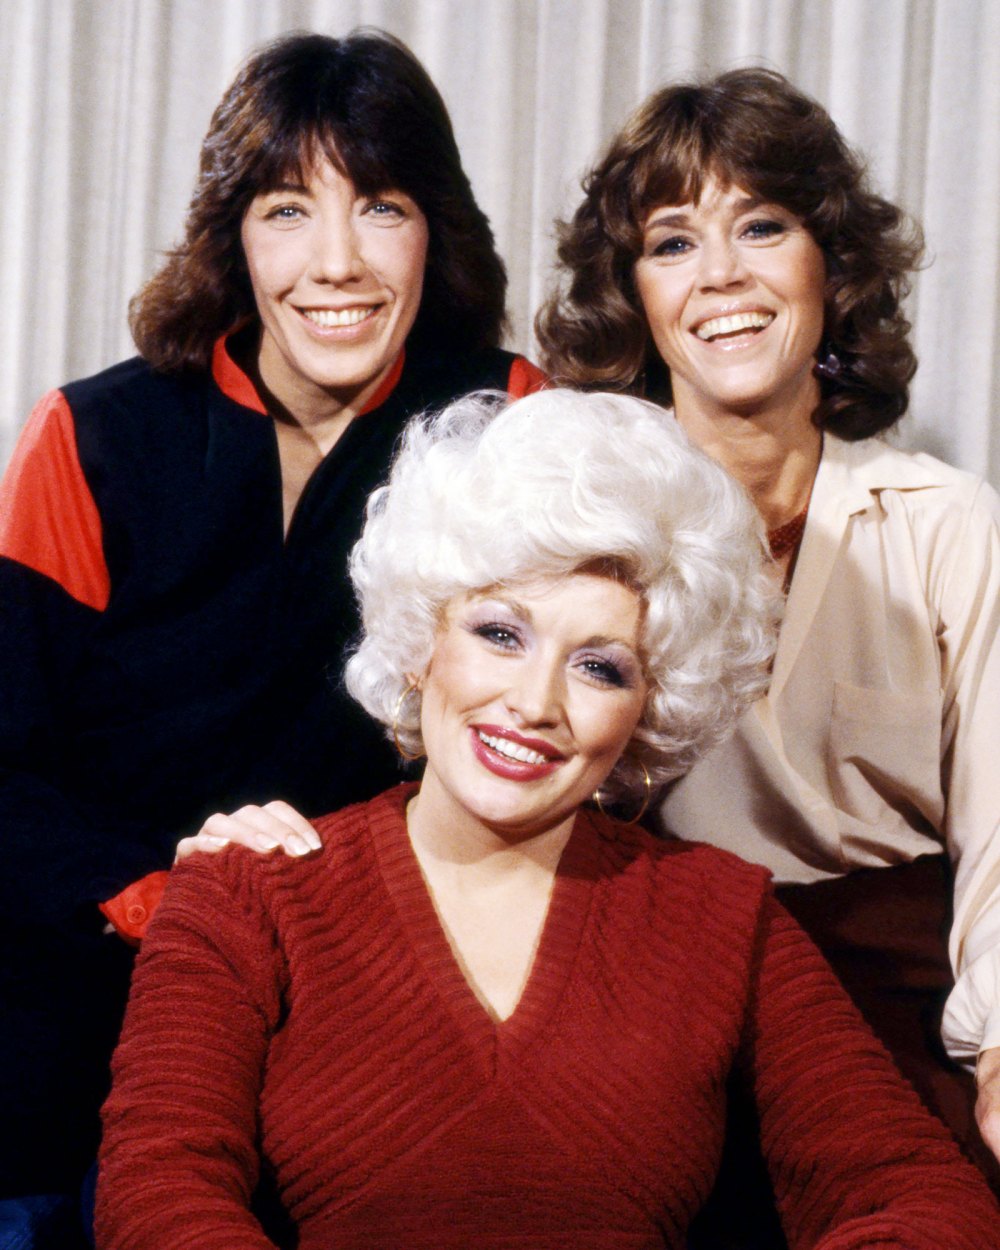 Jane Fonda Lily Tomlin Show Support for Jennifer Aniston 9 to 5 Remake Dolly Parton